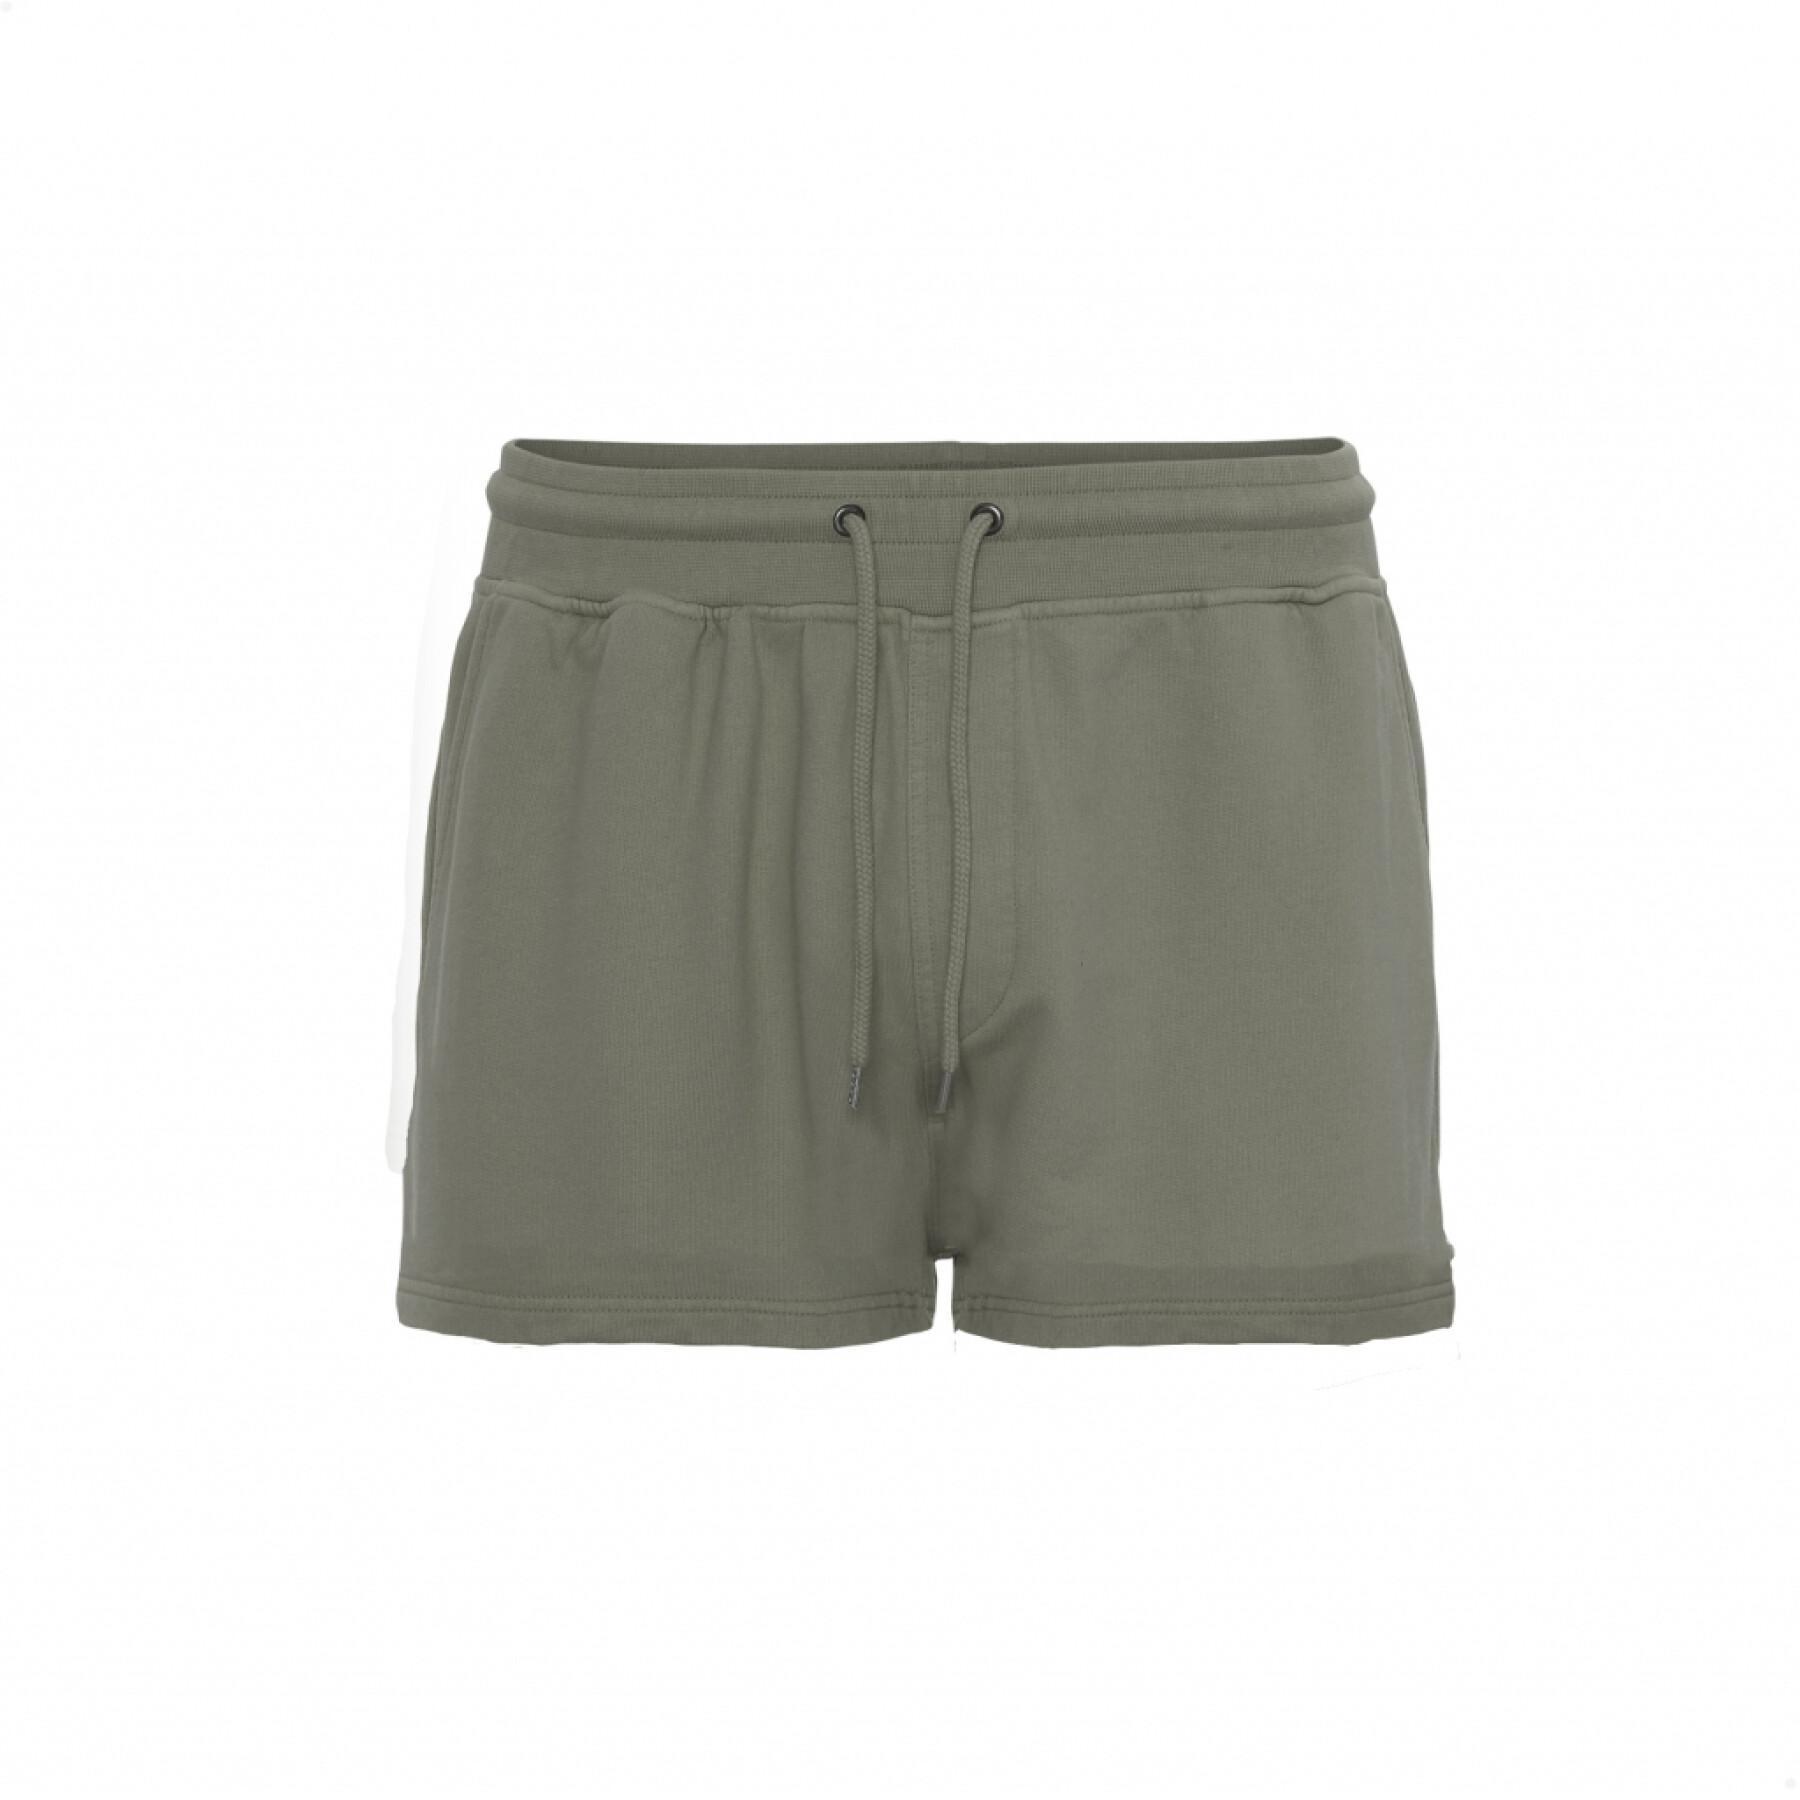 Women's shorts Colorful Standard Organic dusty olive